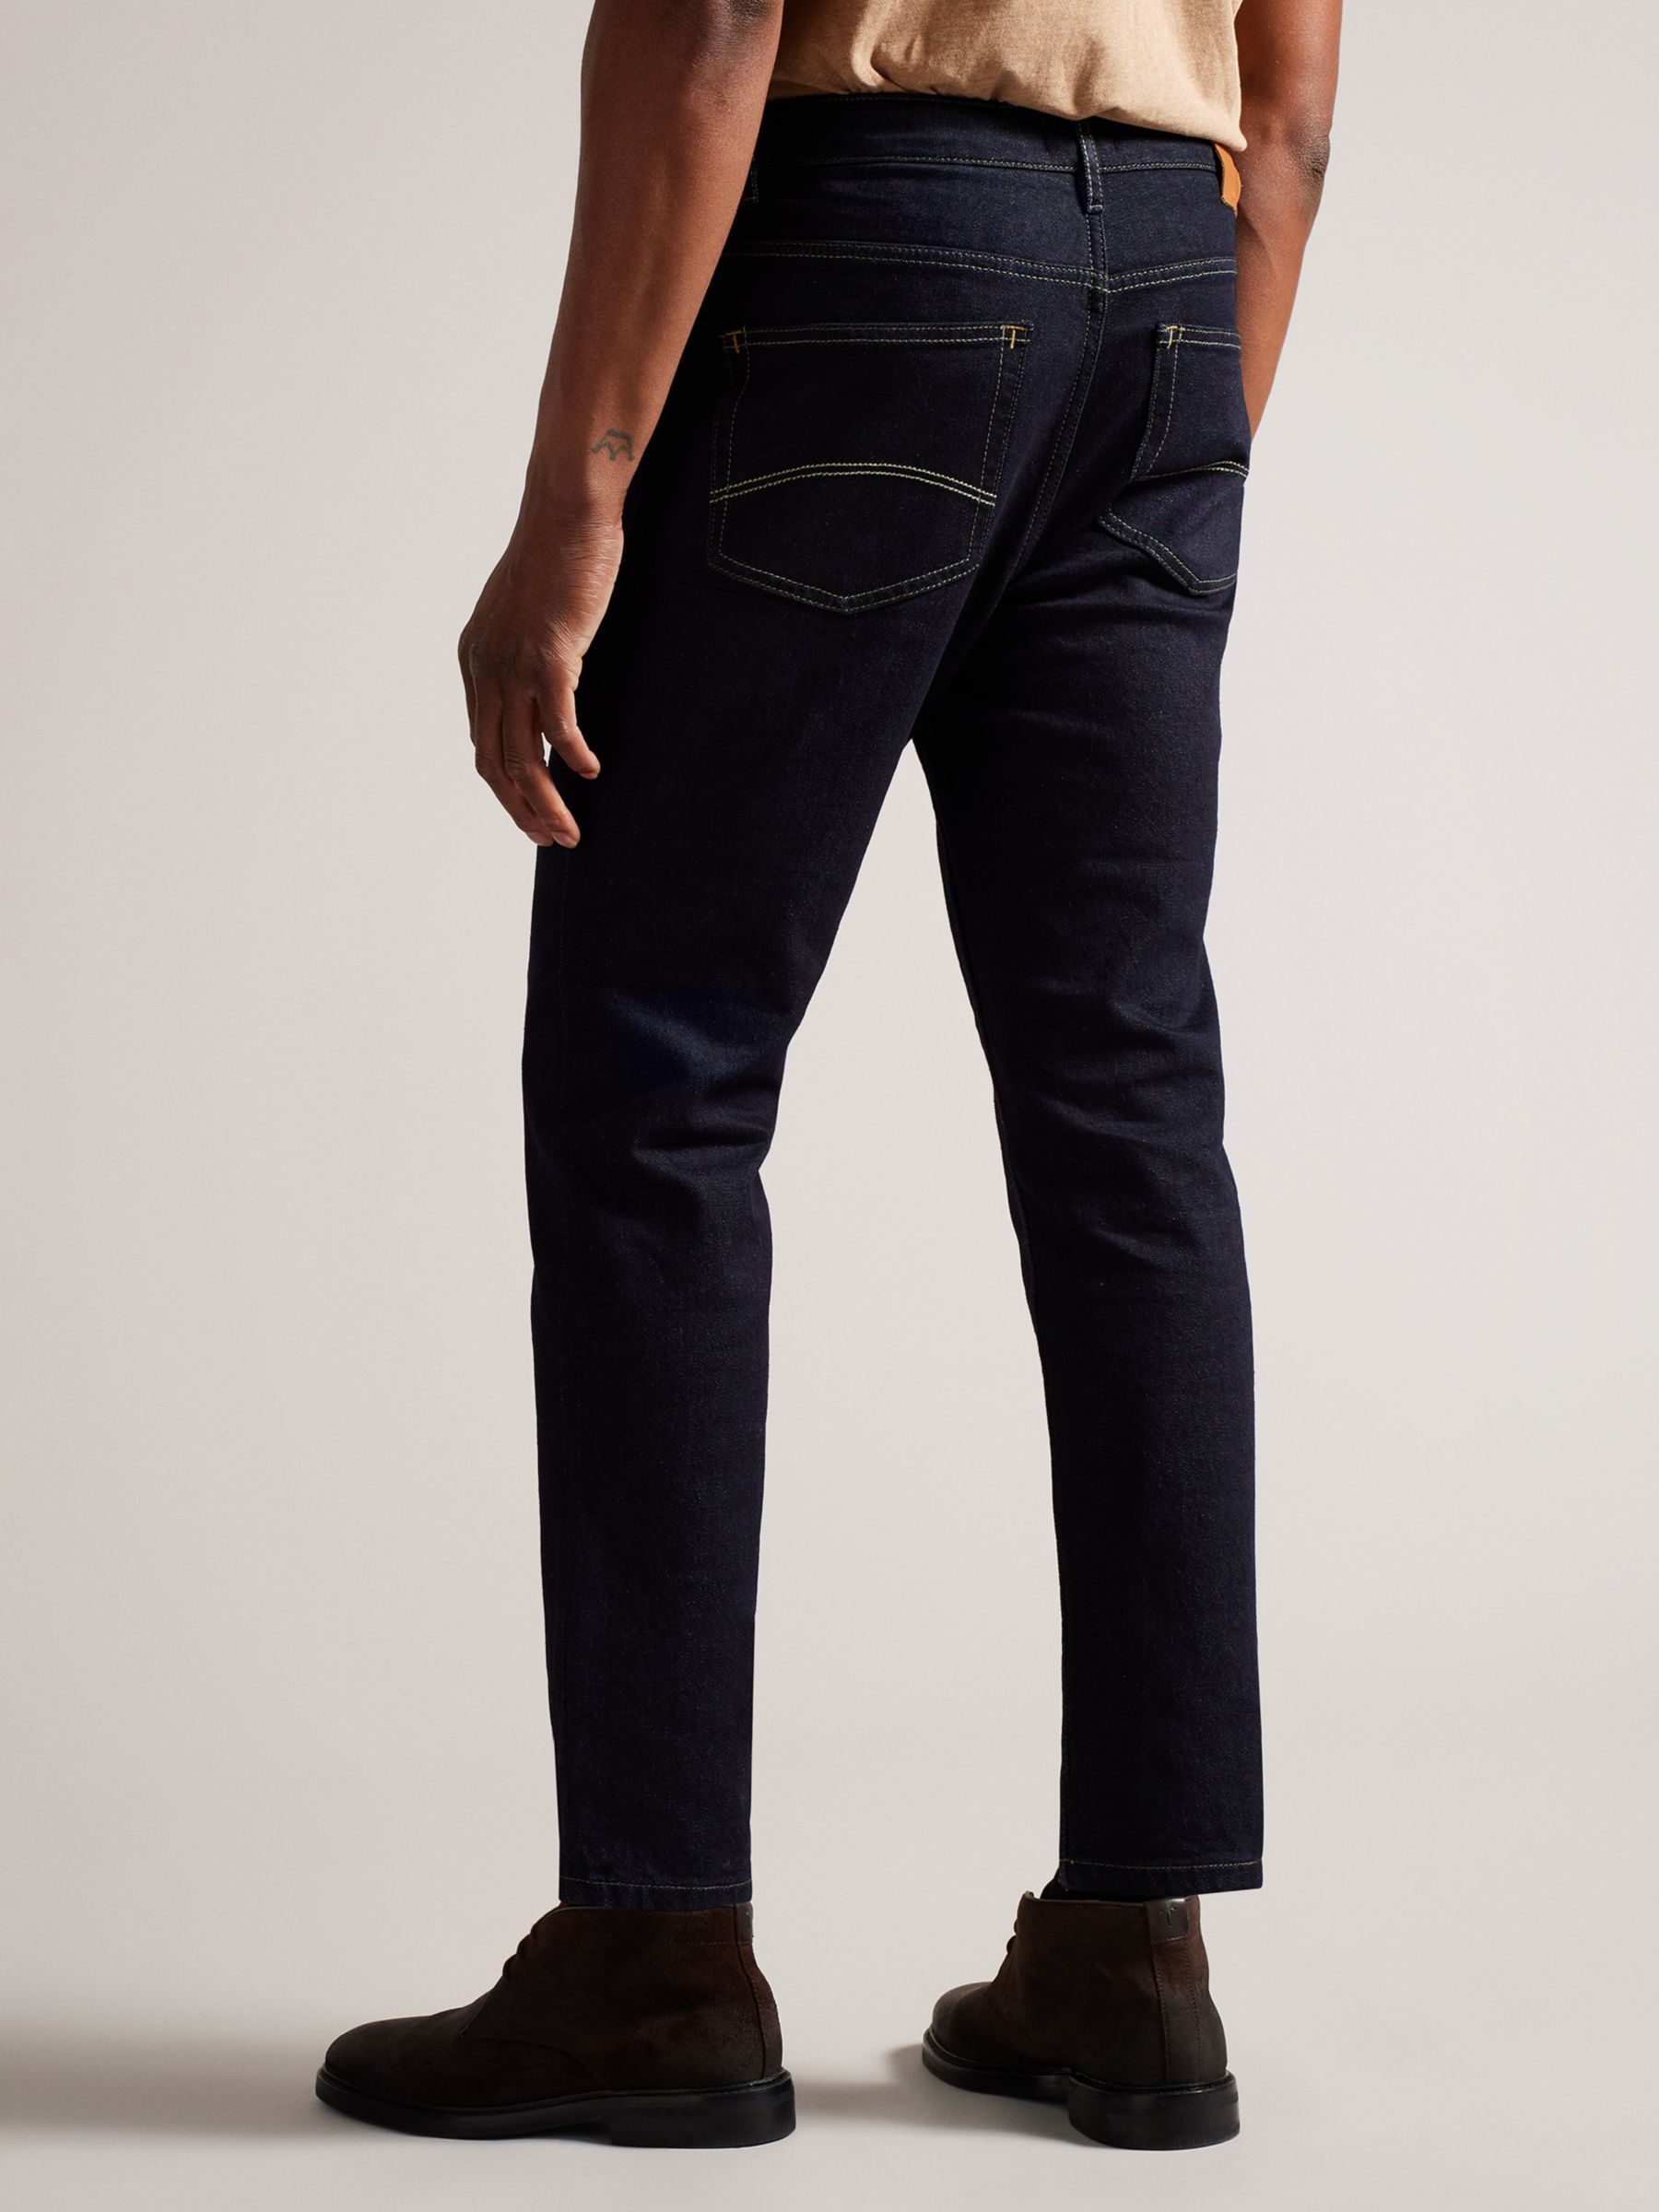 Ted Baker Dyllon Tapered Fit Stretch Jeans, Dark Blue, 28R